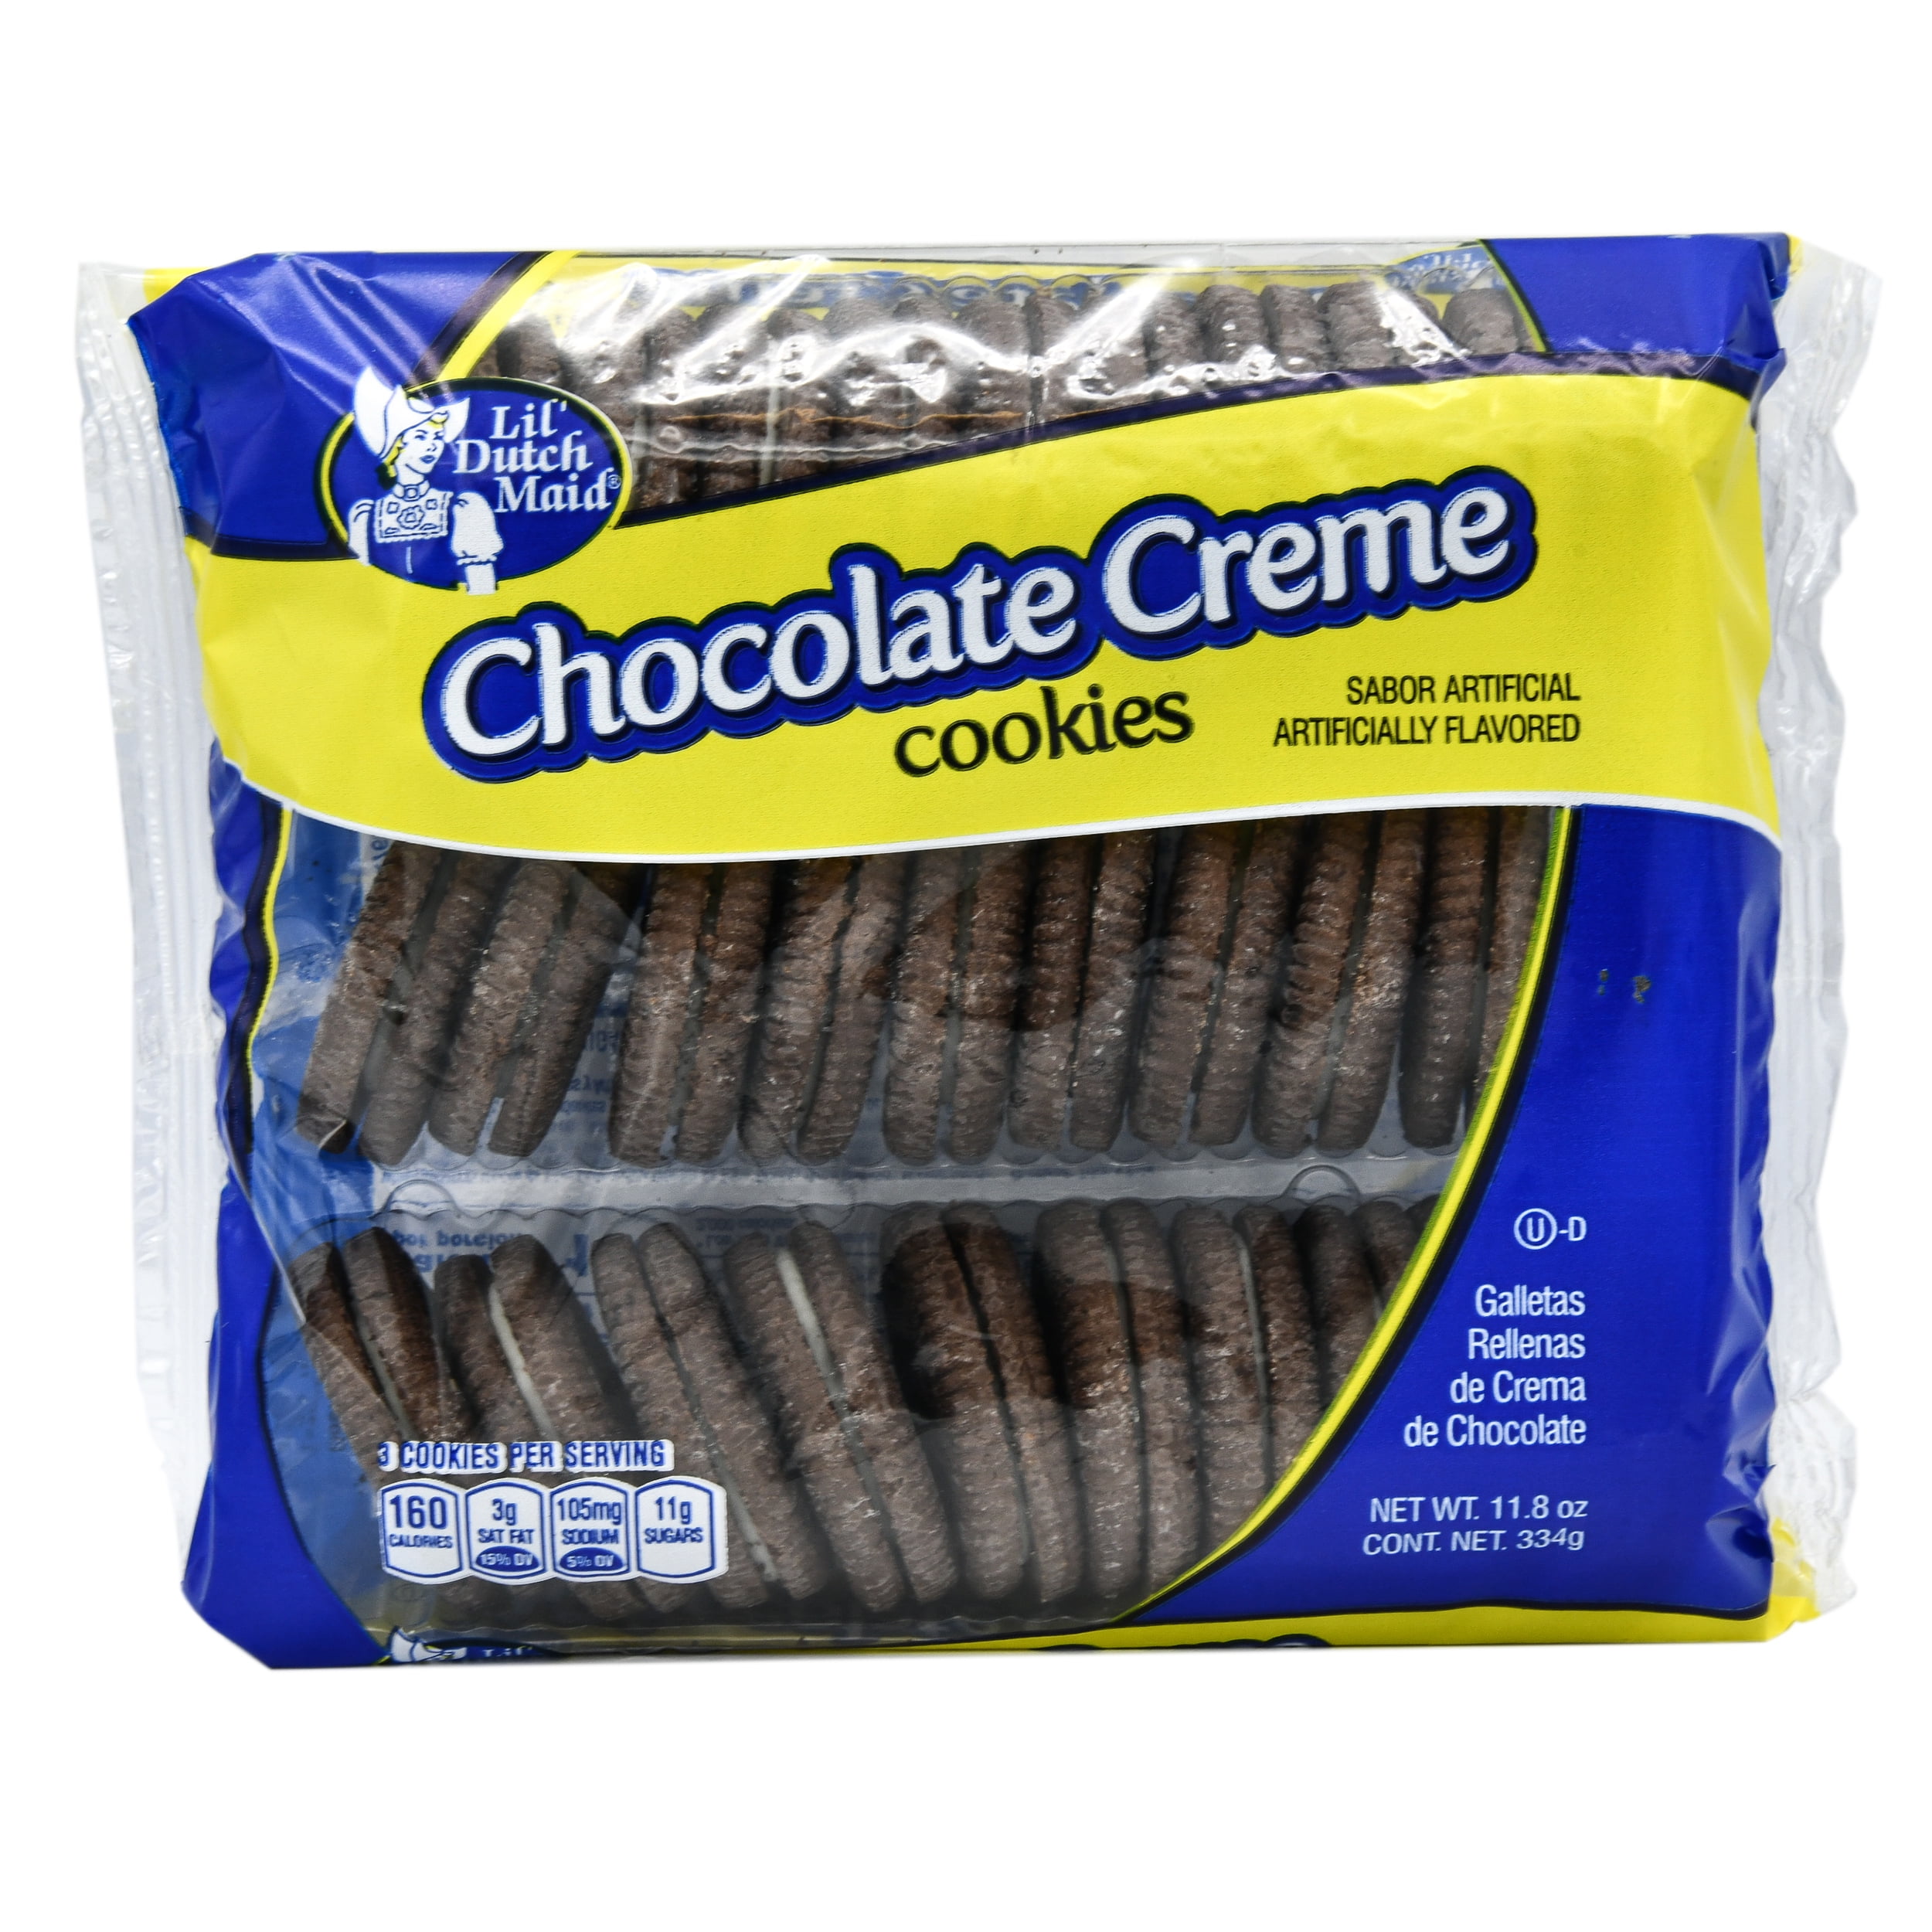 Little Dutch Maid Chocolate Creme Filled Cookies 11.8 oz. 